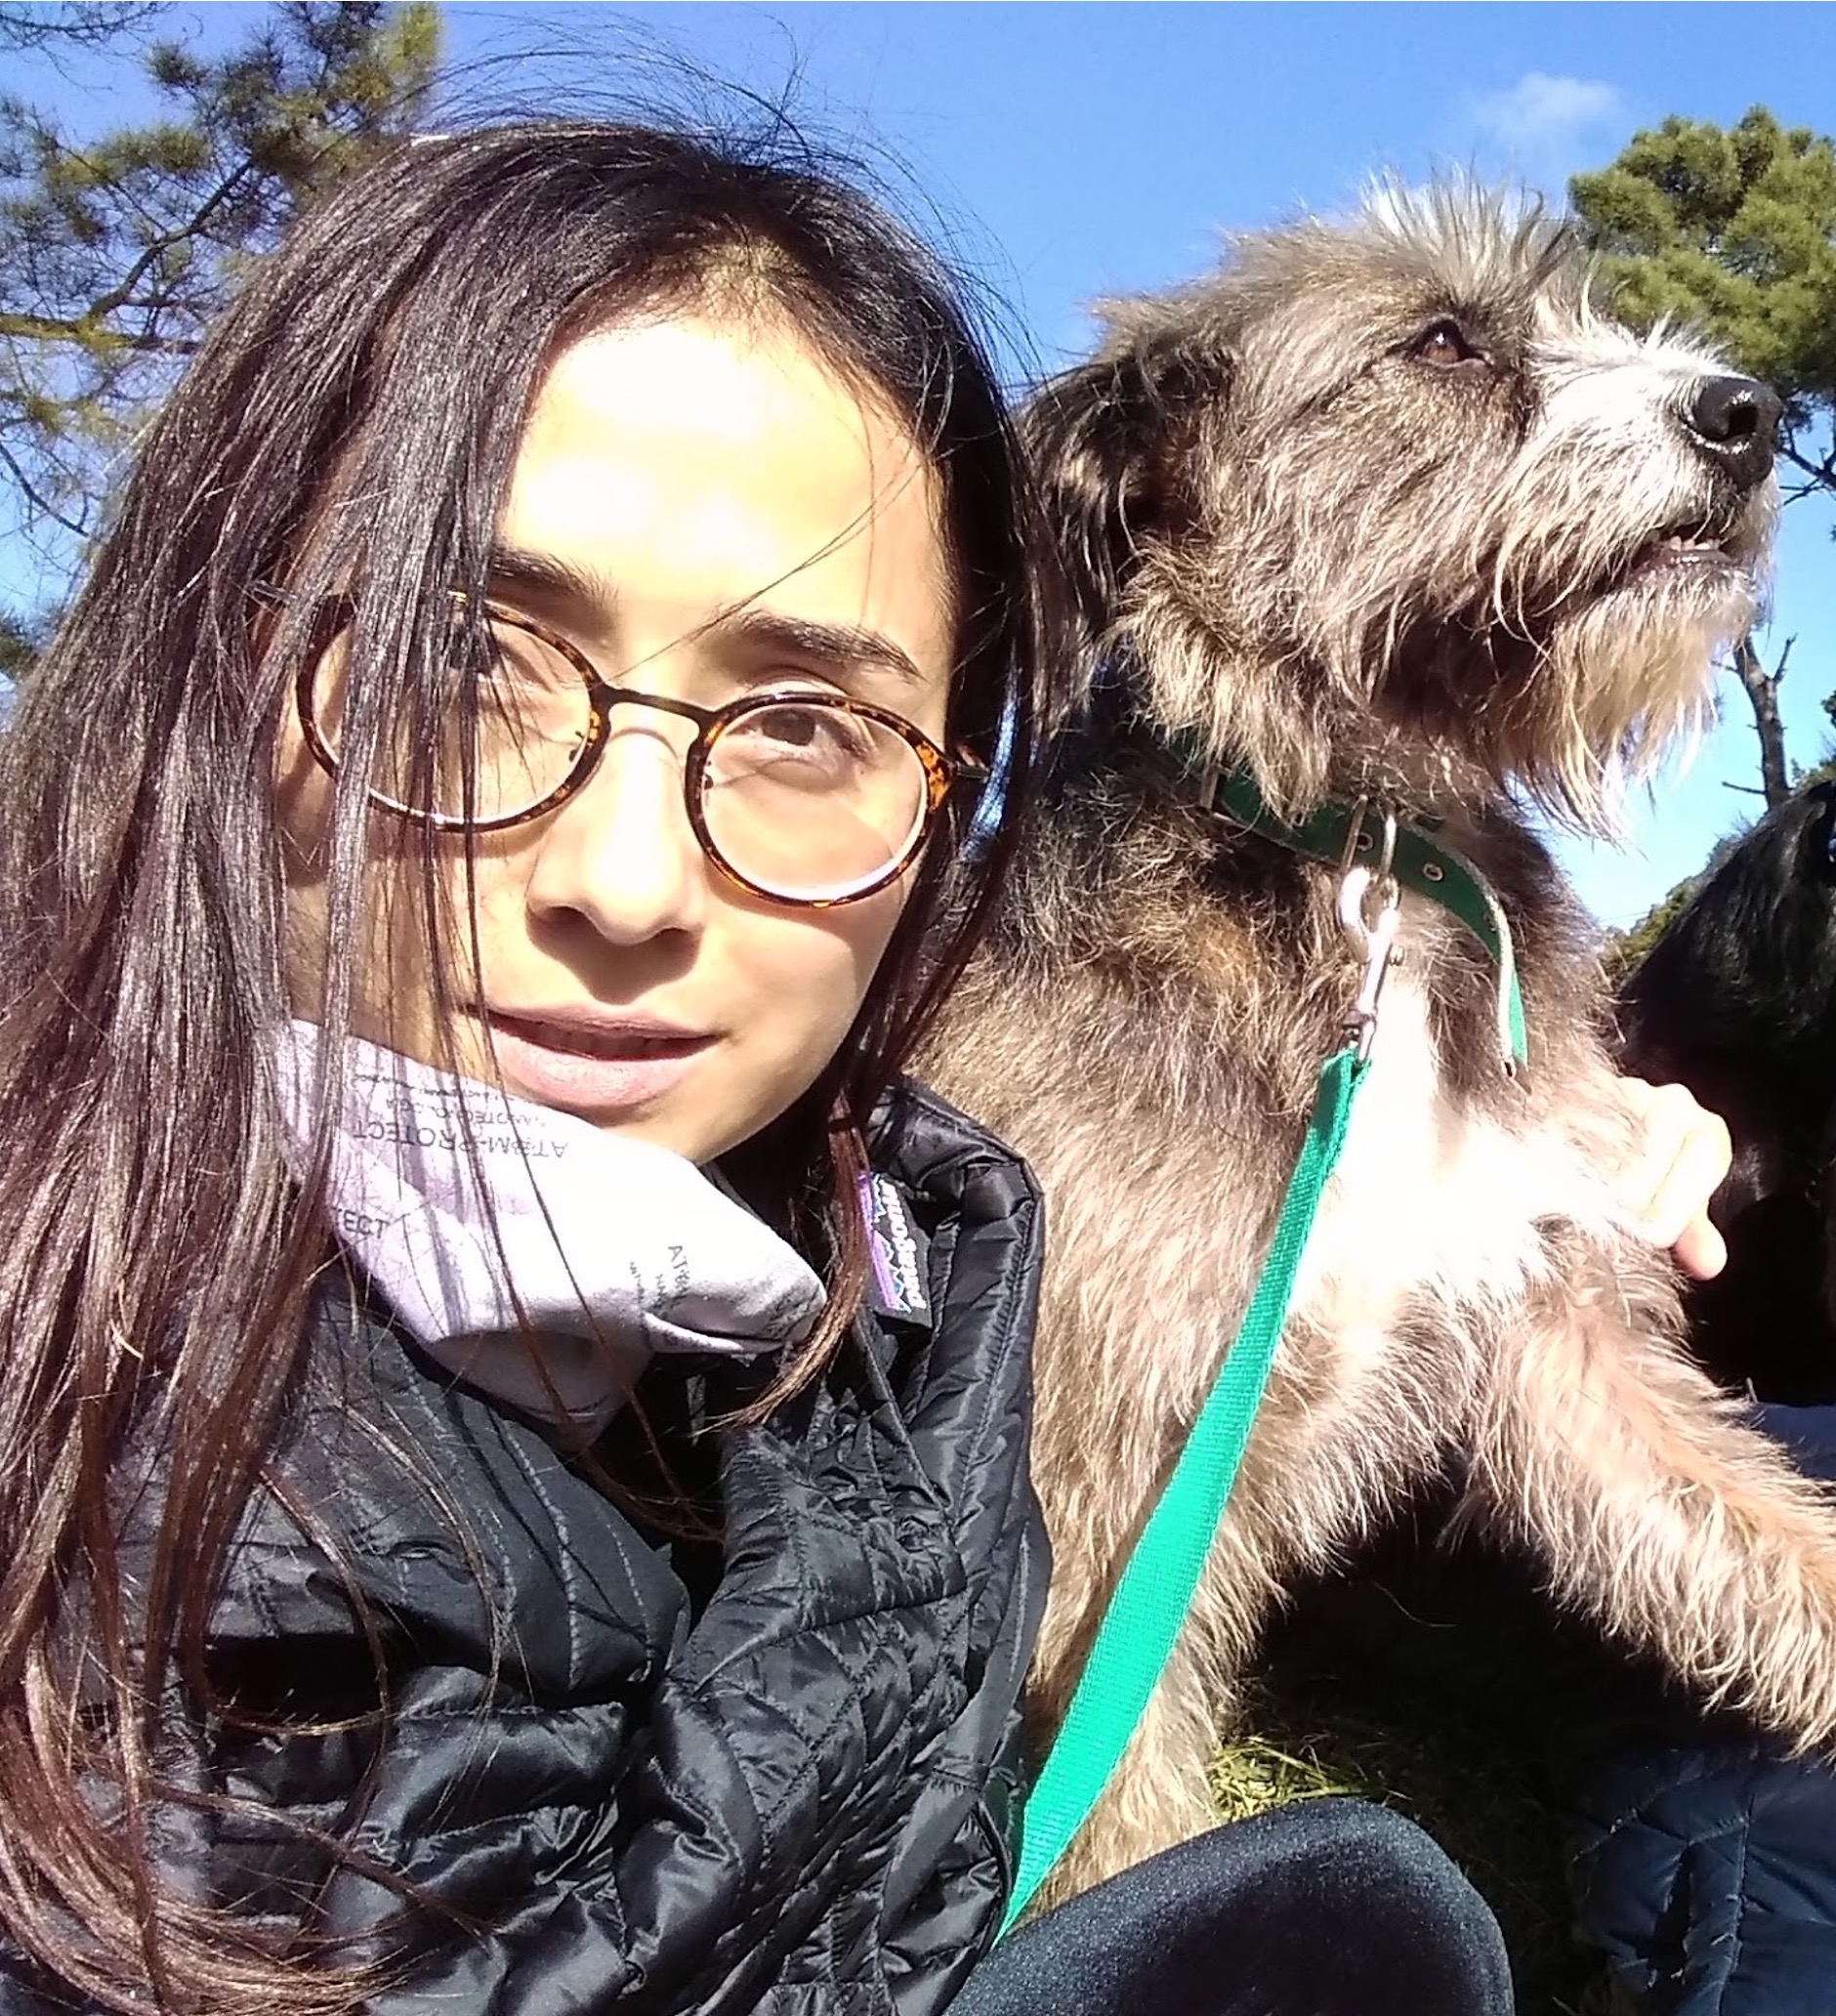 Paz is a woman from Chile. She has long black hair. She is wearing a black winter jacket and a pair of rimmed glasses, and holding her pet, a furry dog who seems to be enjoying sunlight